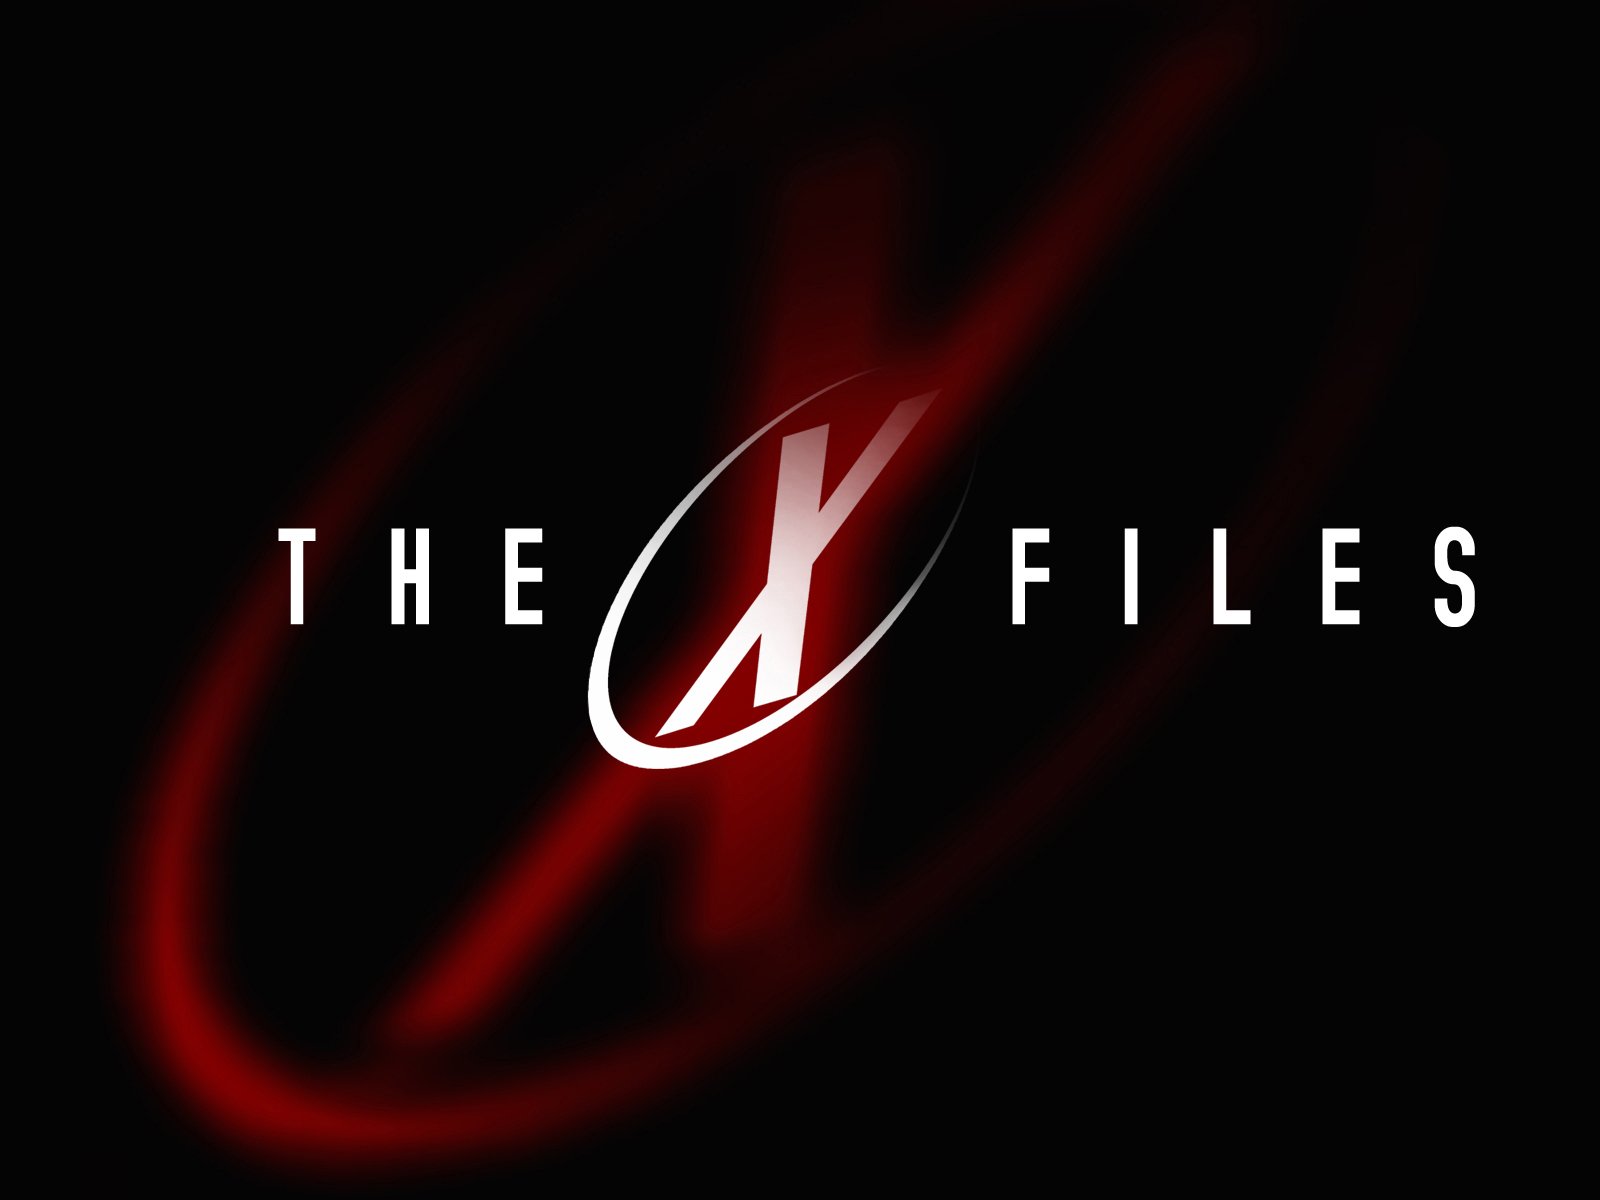 the, X files, Sci fi, Mystery, Drama, Television, Files, Series, Poster Wallpaper